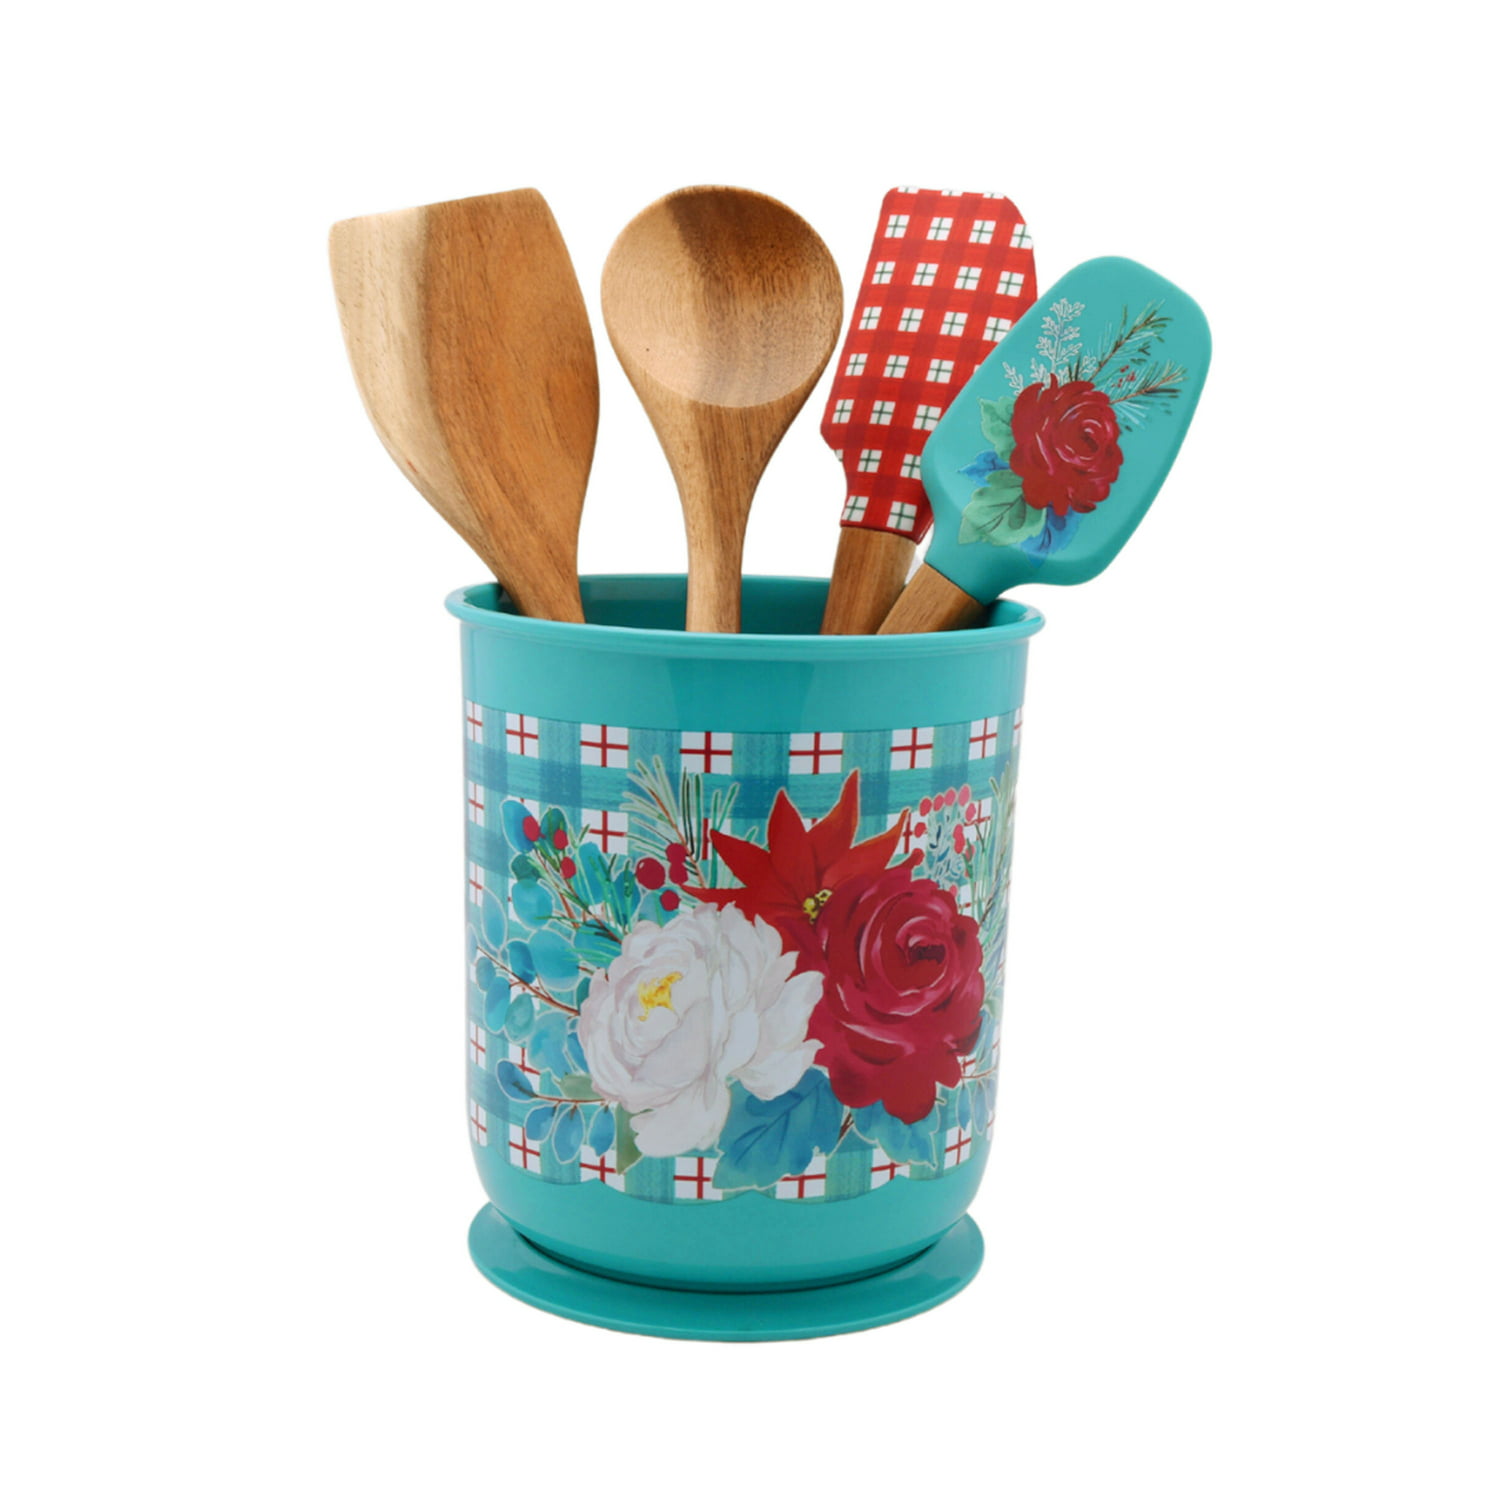 5-Piece The Pioneer Woman Silicone and Wood Cooking Utensils and Crock Set (Wishful Winter) $6.92 + Free S&H w/ Walmart+ or $35+